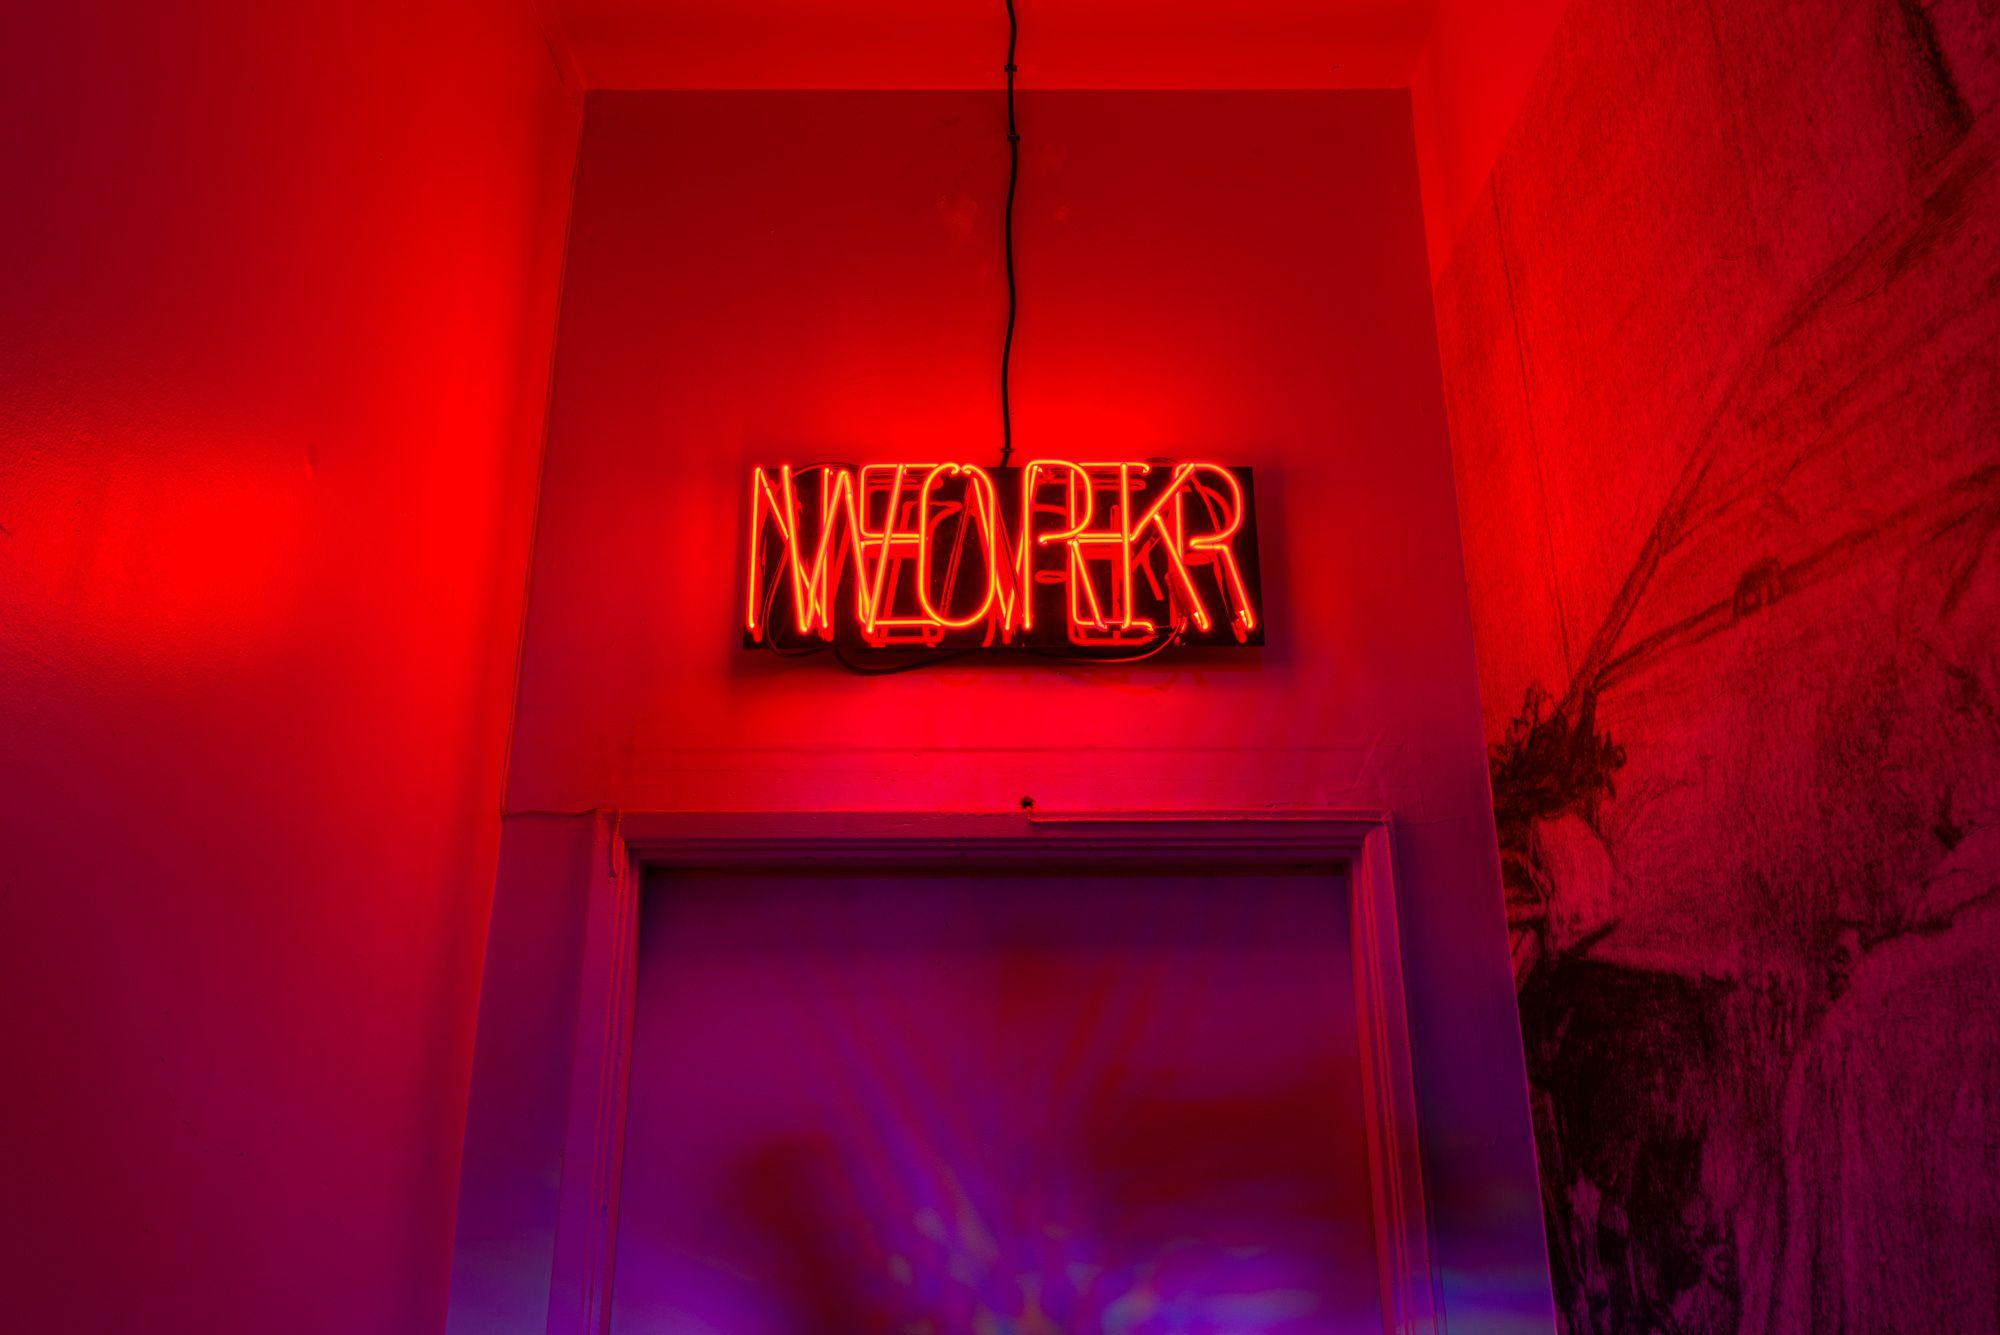 Overlapping words "NEVER WORK" in blood red neon, mounted above a door next to a large wall drawing.